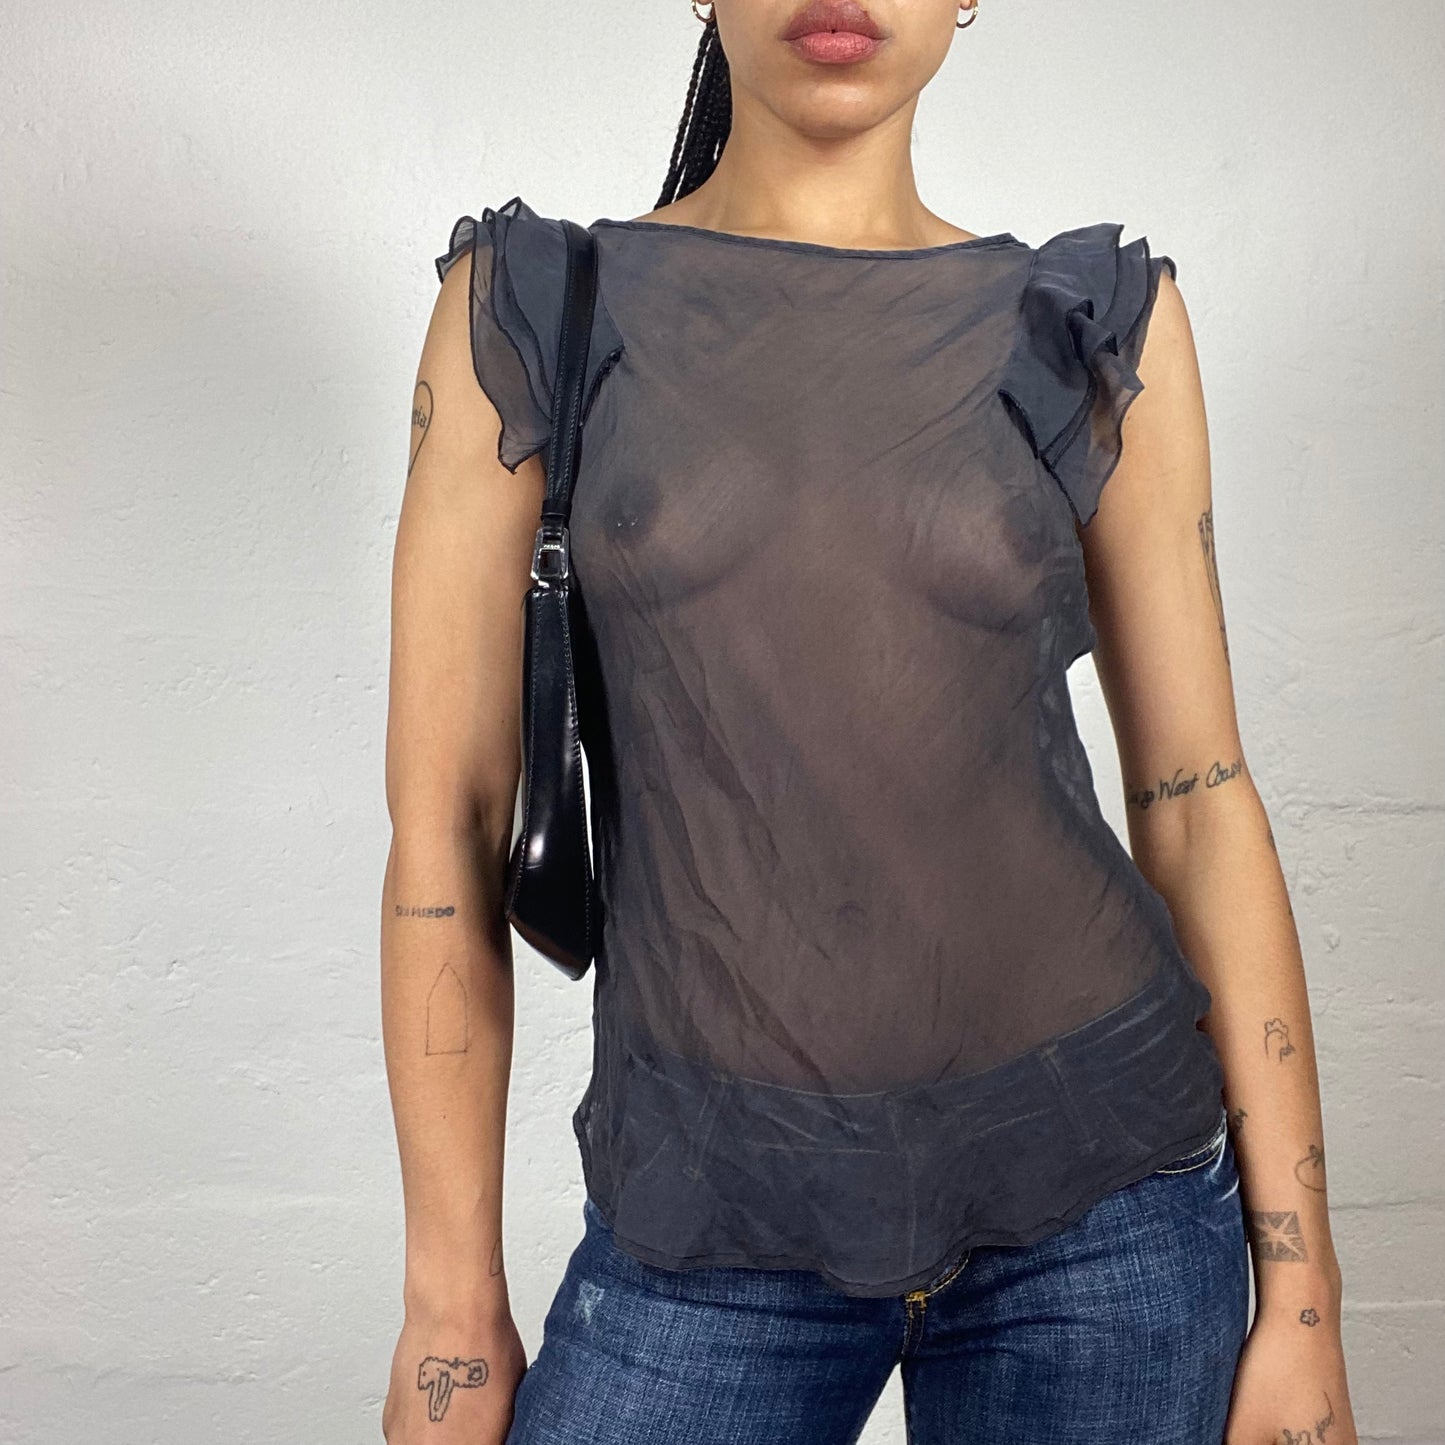 Vintage 2000's Romantic Dark Grey Chiffon See Through Top with Ruffled Shoulder Details (S)